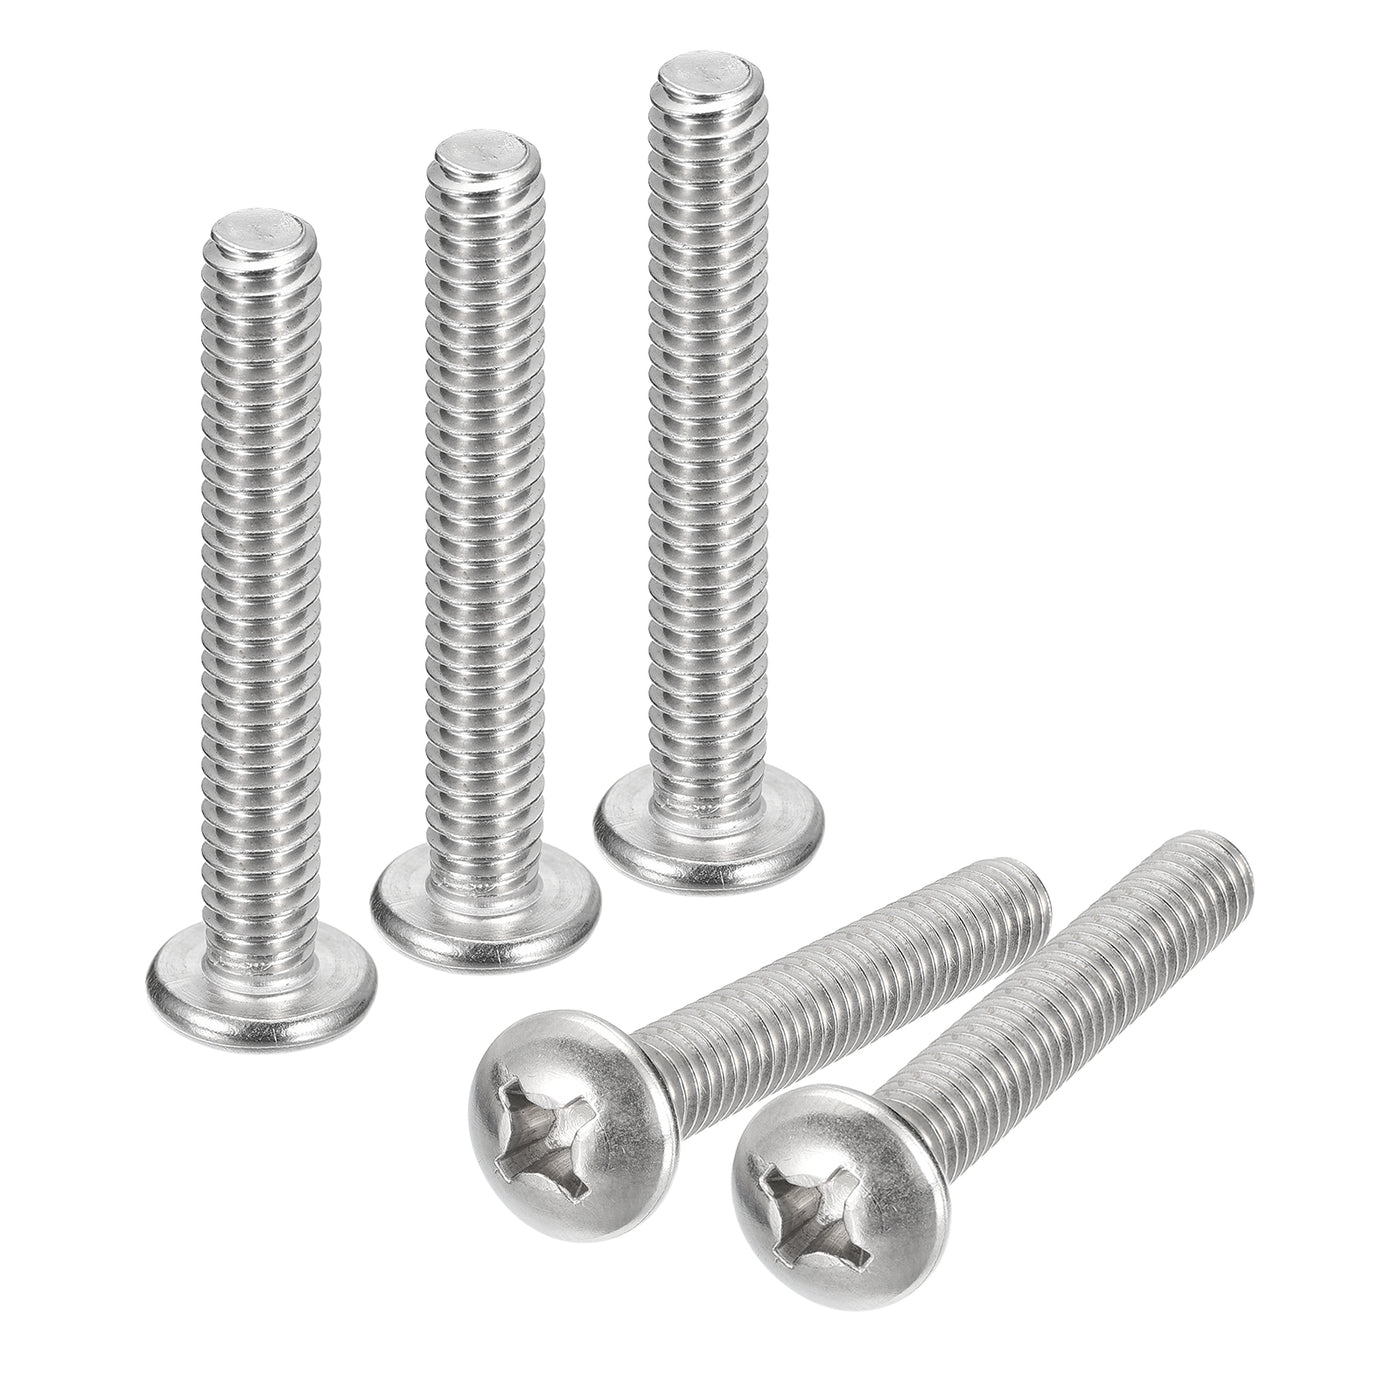 uxcell Uxcell 1/4-20x1-3/4" Pan Head Machine Screws, Stainless Steel 18-8 Screw, Pack of 20